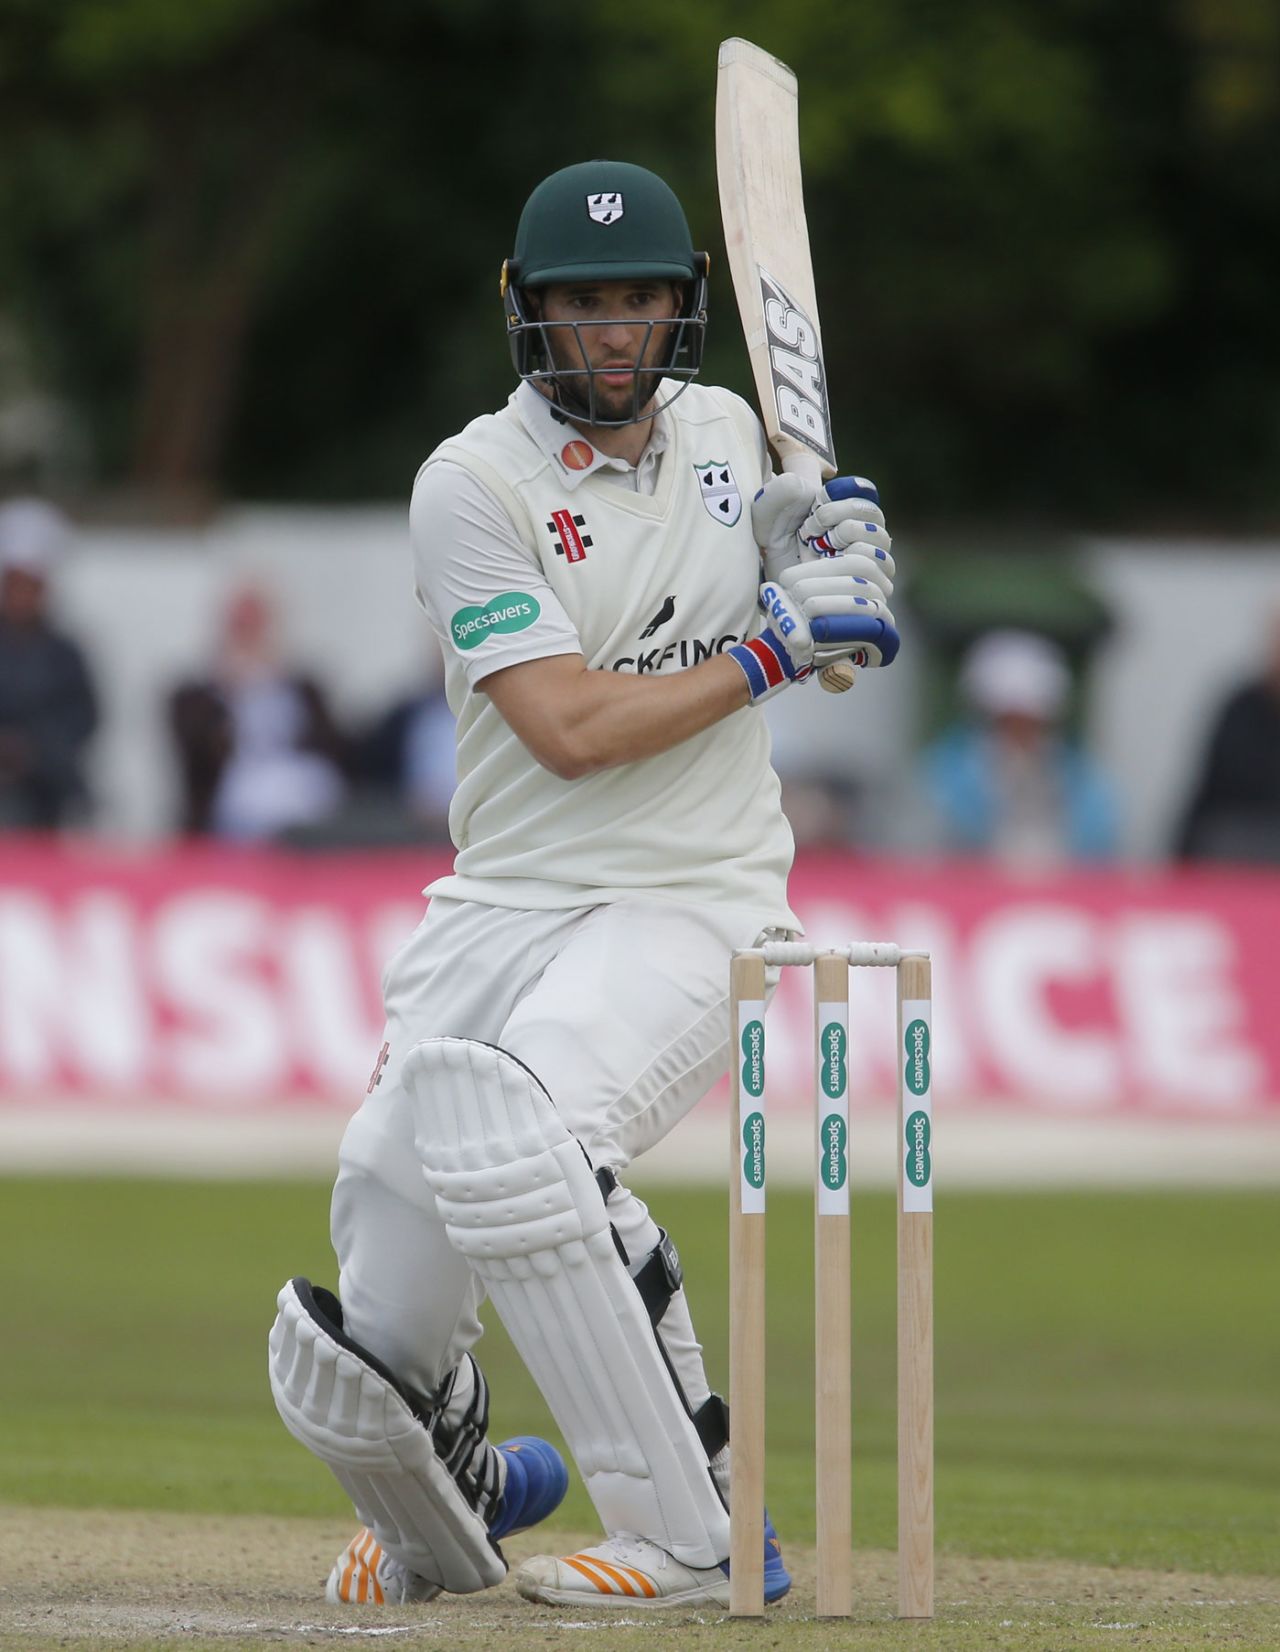 Wayne Parnell contributed vital runs, Lancashire v Worcestershire, Specsavers Championship, Division One, Southport, August 30, 2018